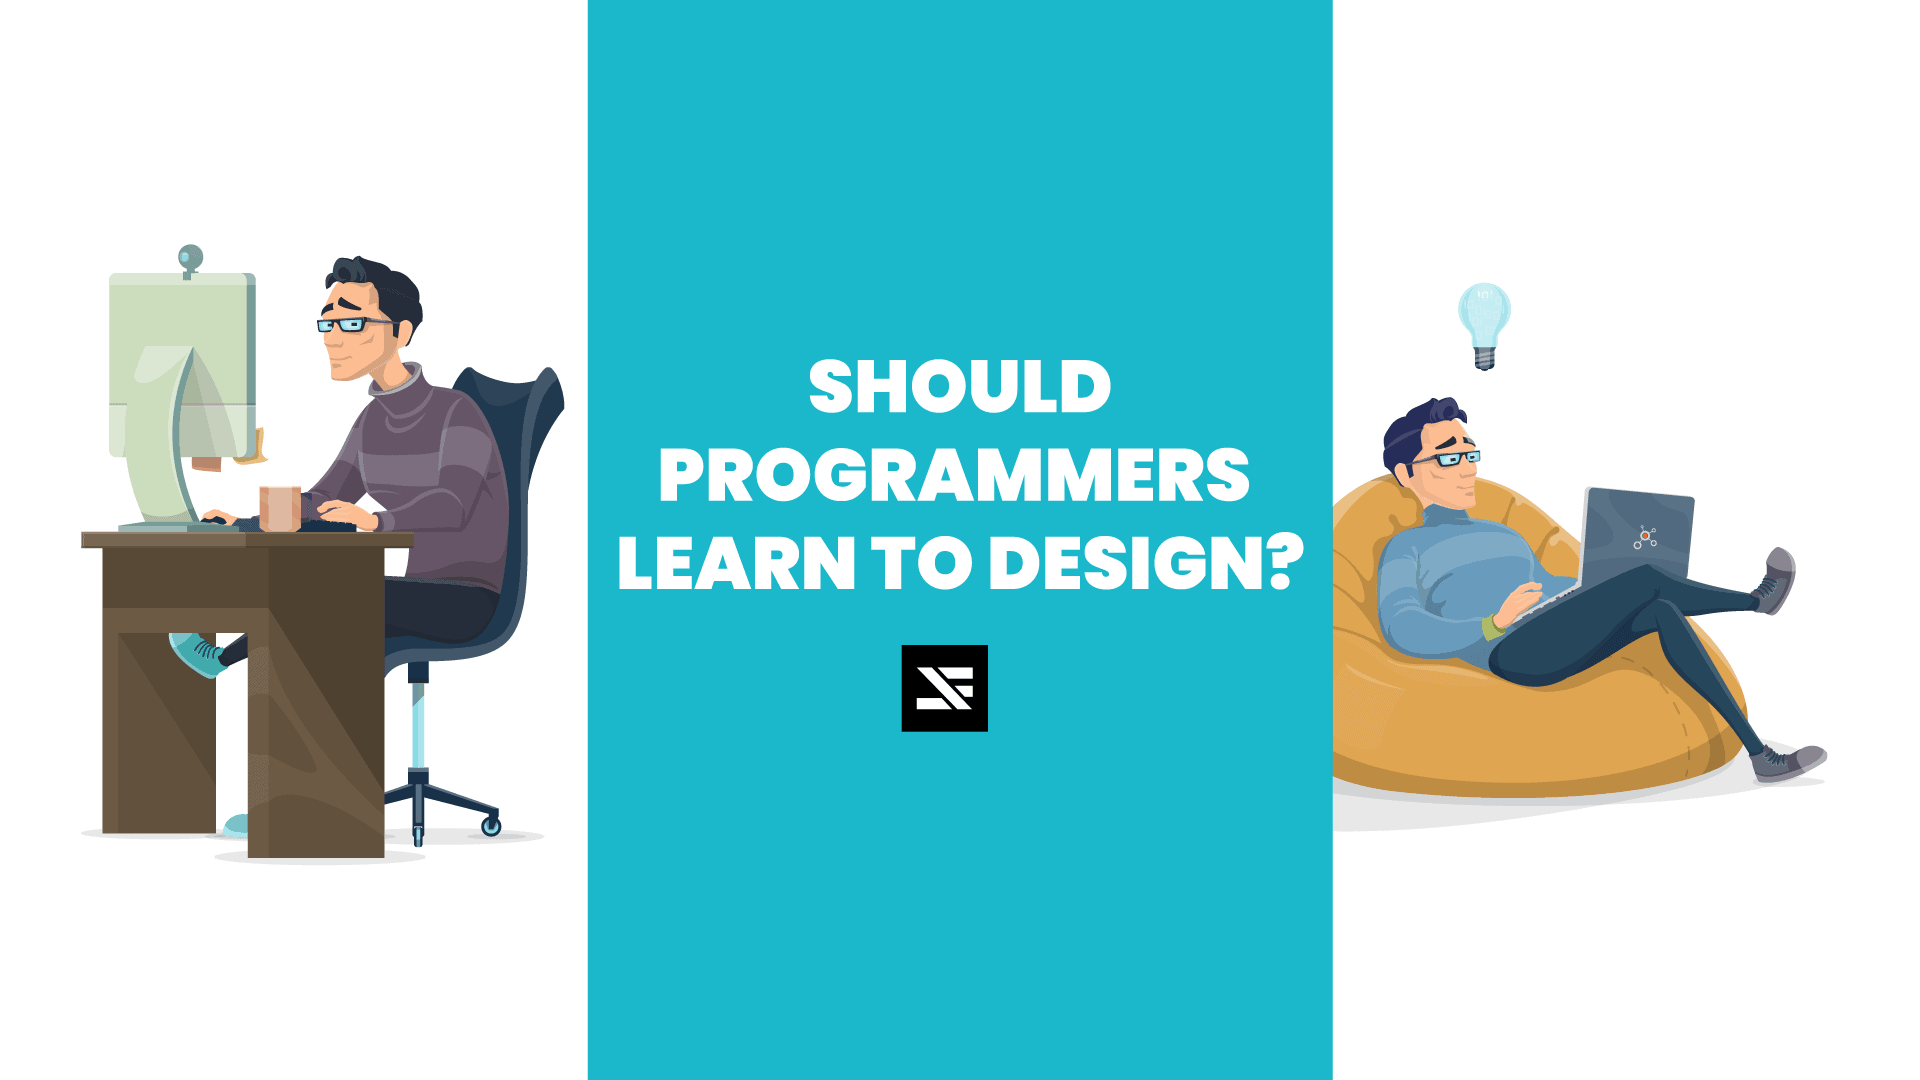 Should Programmers Learn to Design?